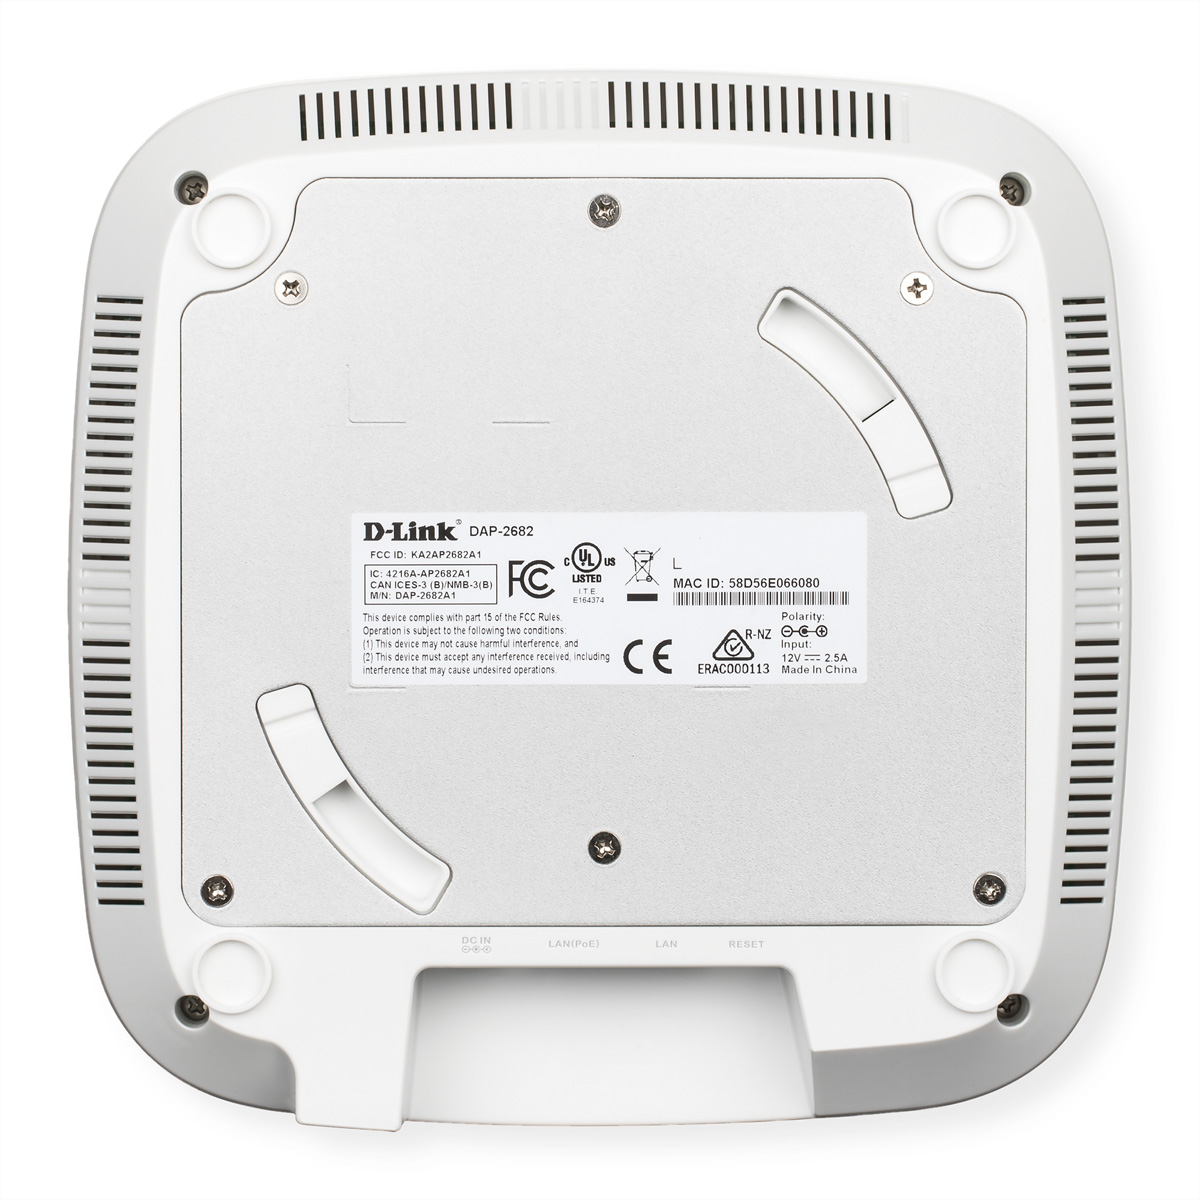 PoE Wave 2 Wireless D-LINK AC2300 DAP-2682 Points Gbit/s 2,3 Point Dual-Band Access Access